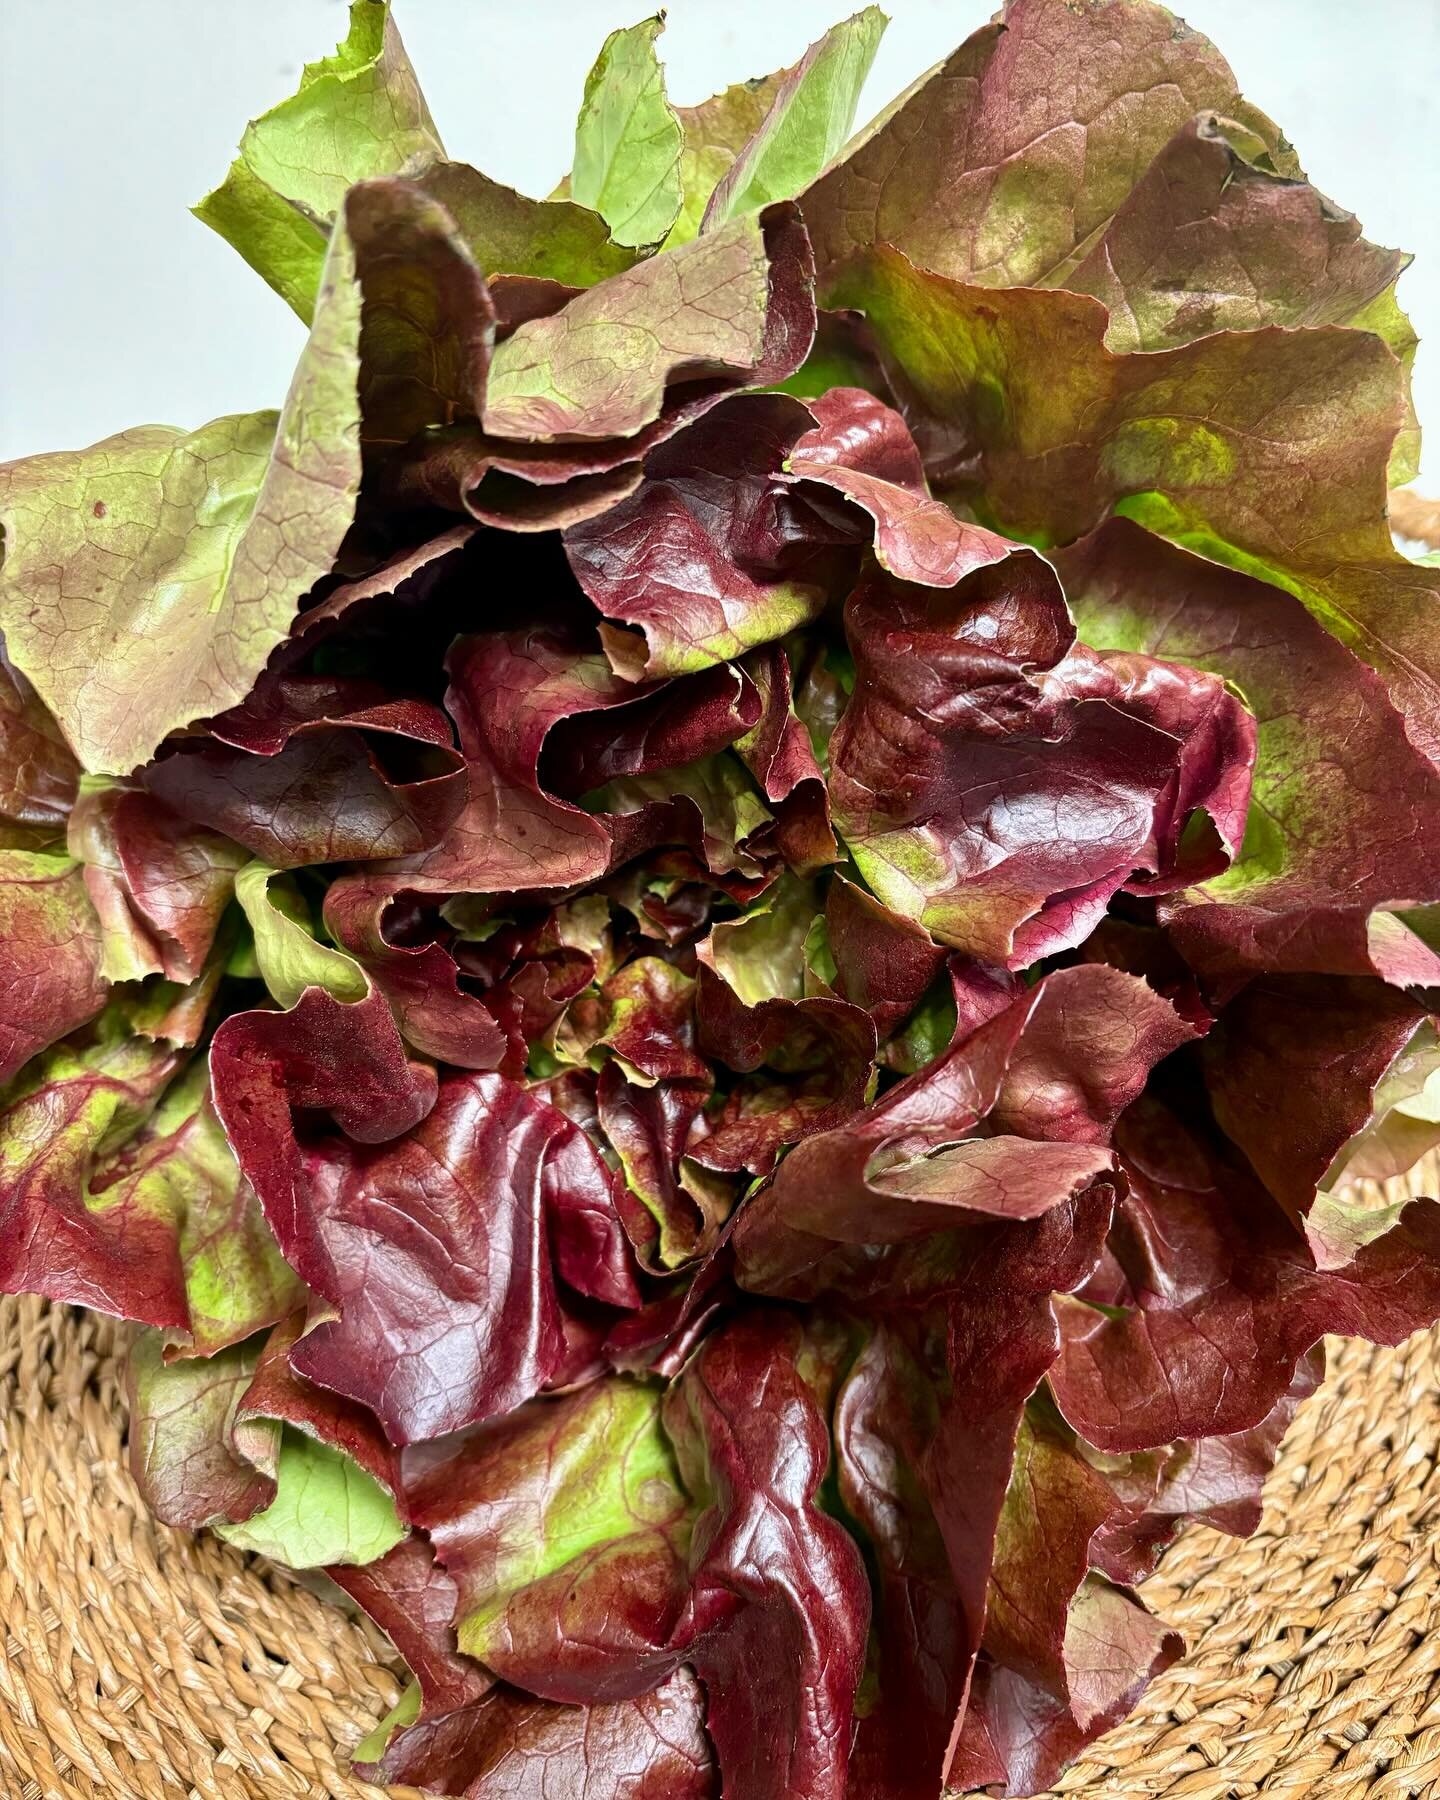 We have some LOCAL produce in our store this week including red bib lettuce and green leaf lettuce, radishes, and Swiss chard. 

We are open until 5 pm today. 

And it&rsquo;s not too late to order your salads, fruit bowls, and veggie trays for Easte